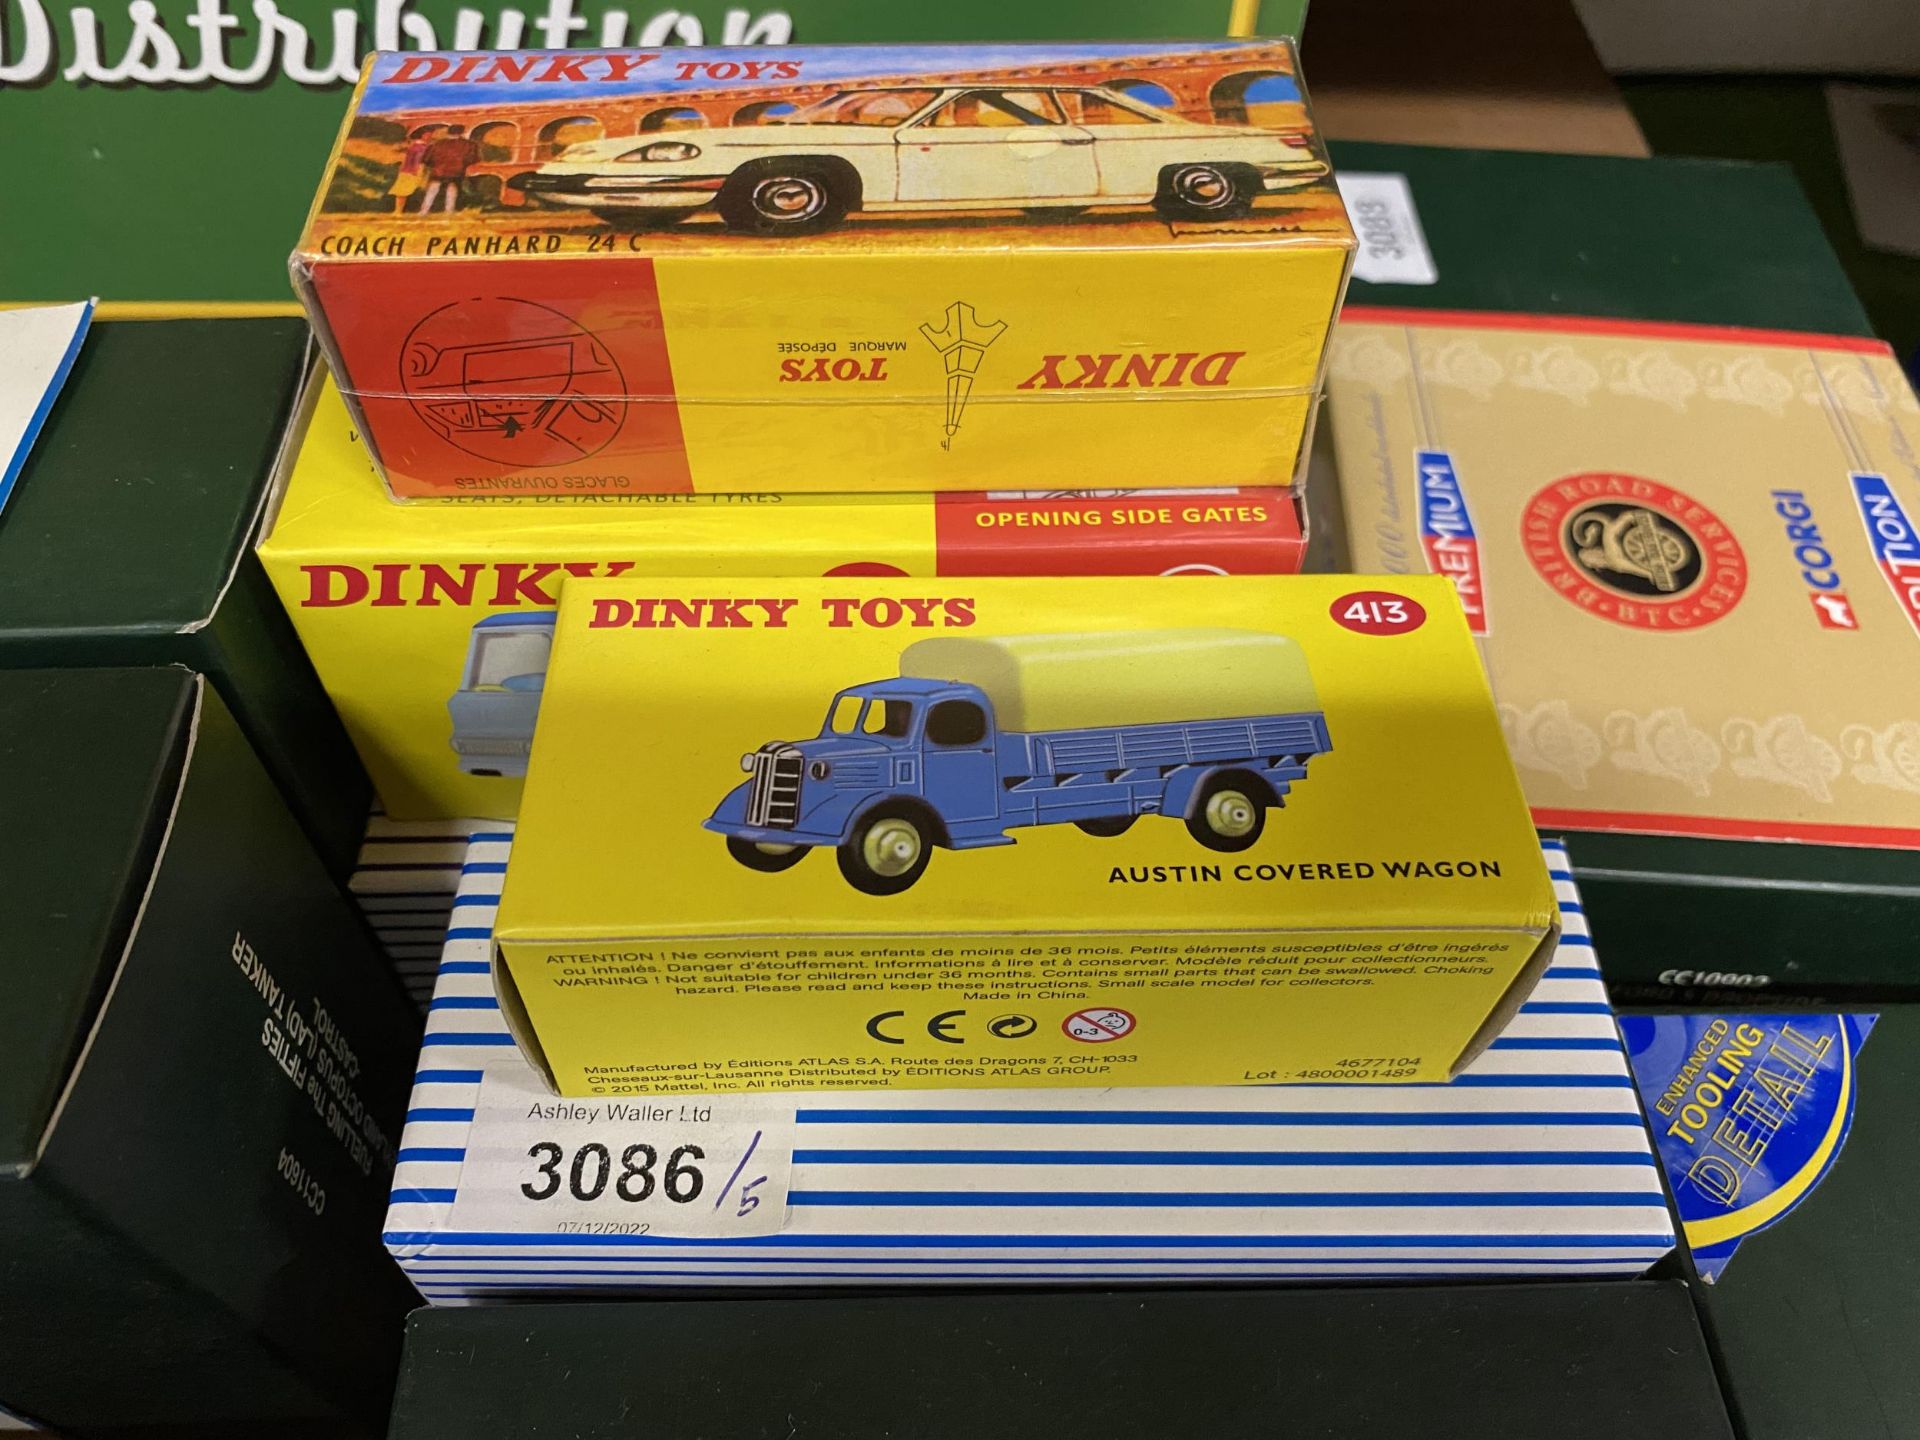 FIVE BOXED ATLAS DINKY MODELS COMPRISING OF A BEDFORD TIPPER, AUSTIN ETC